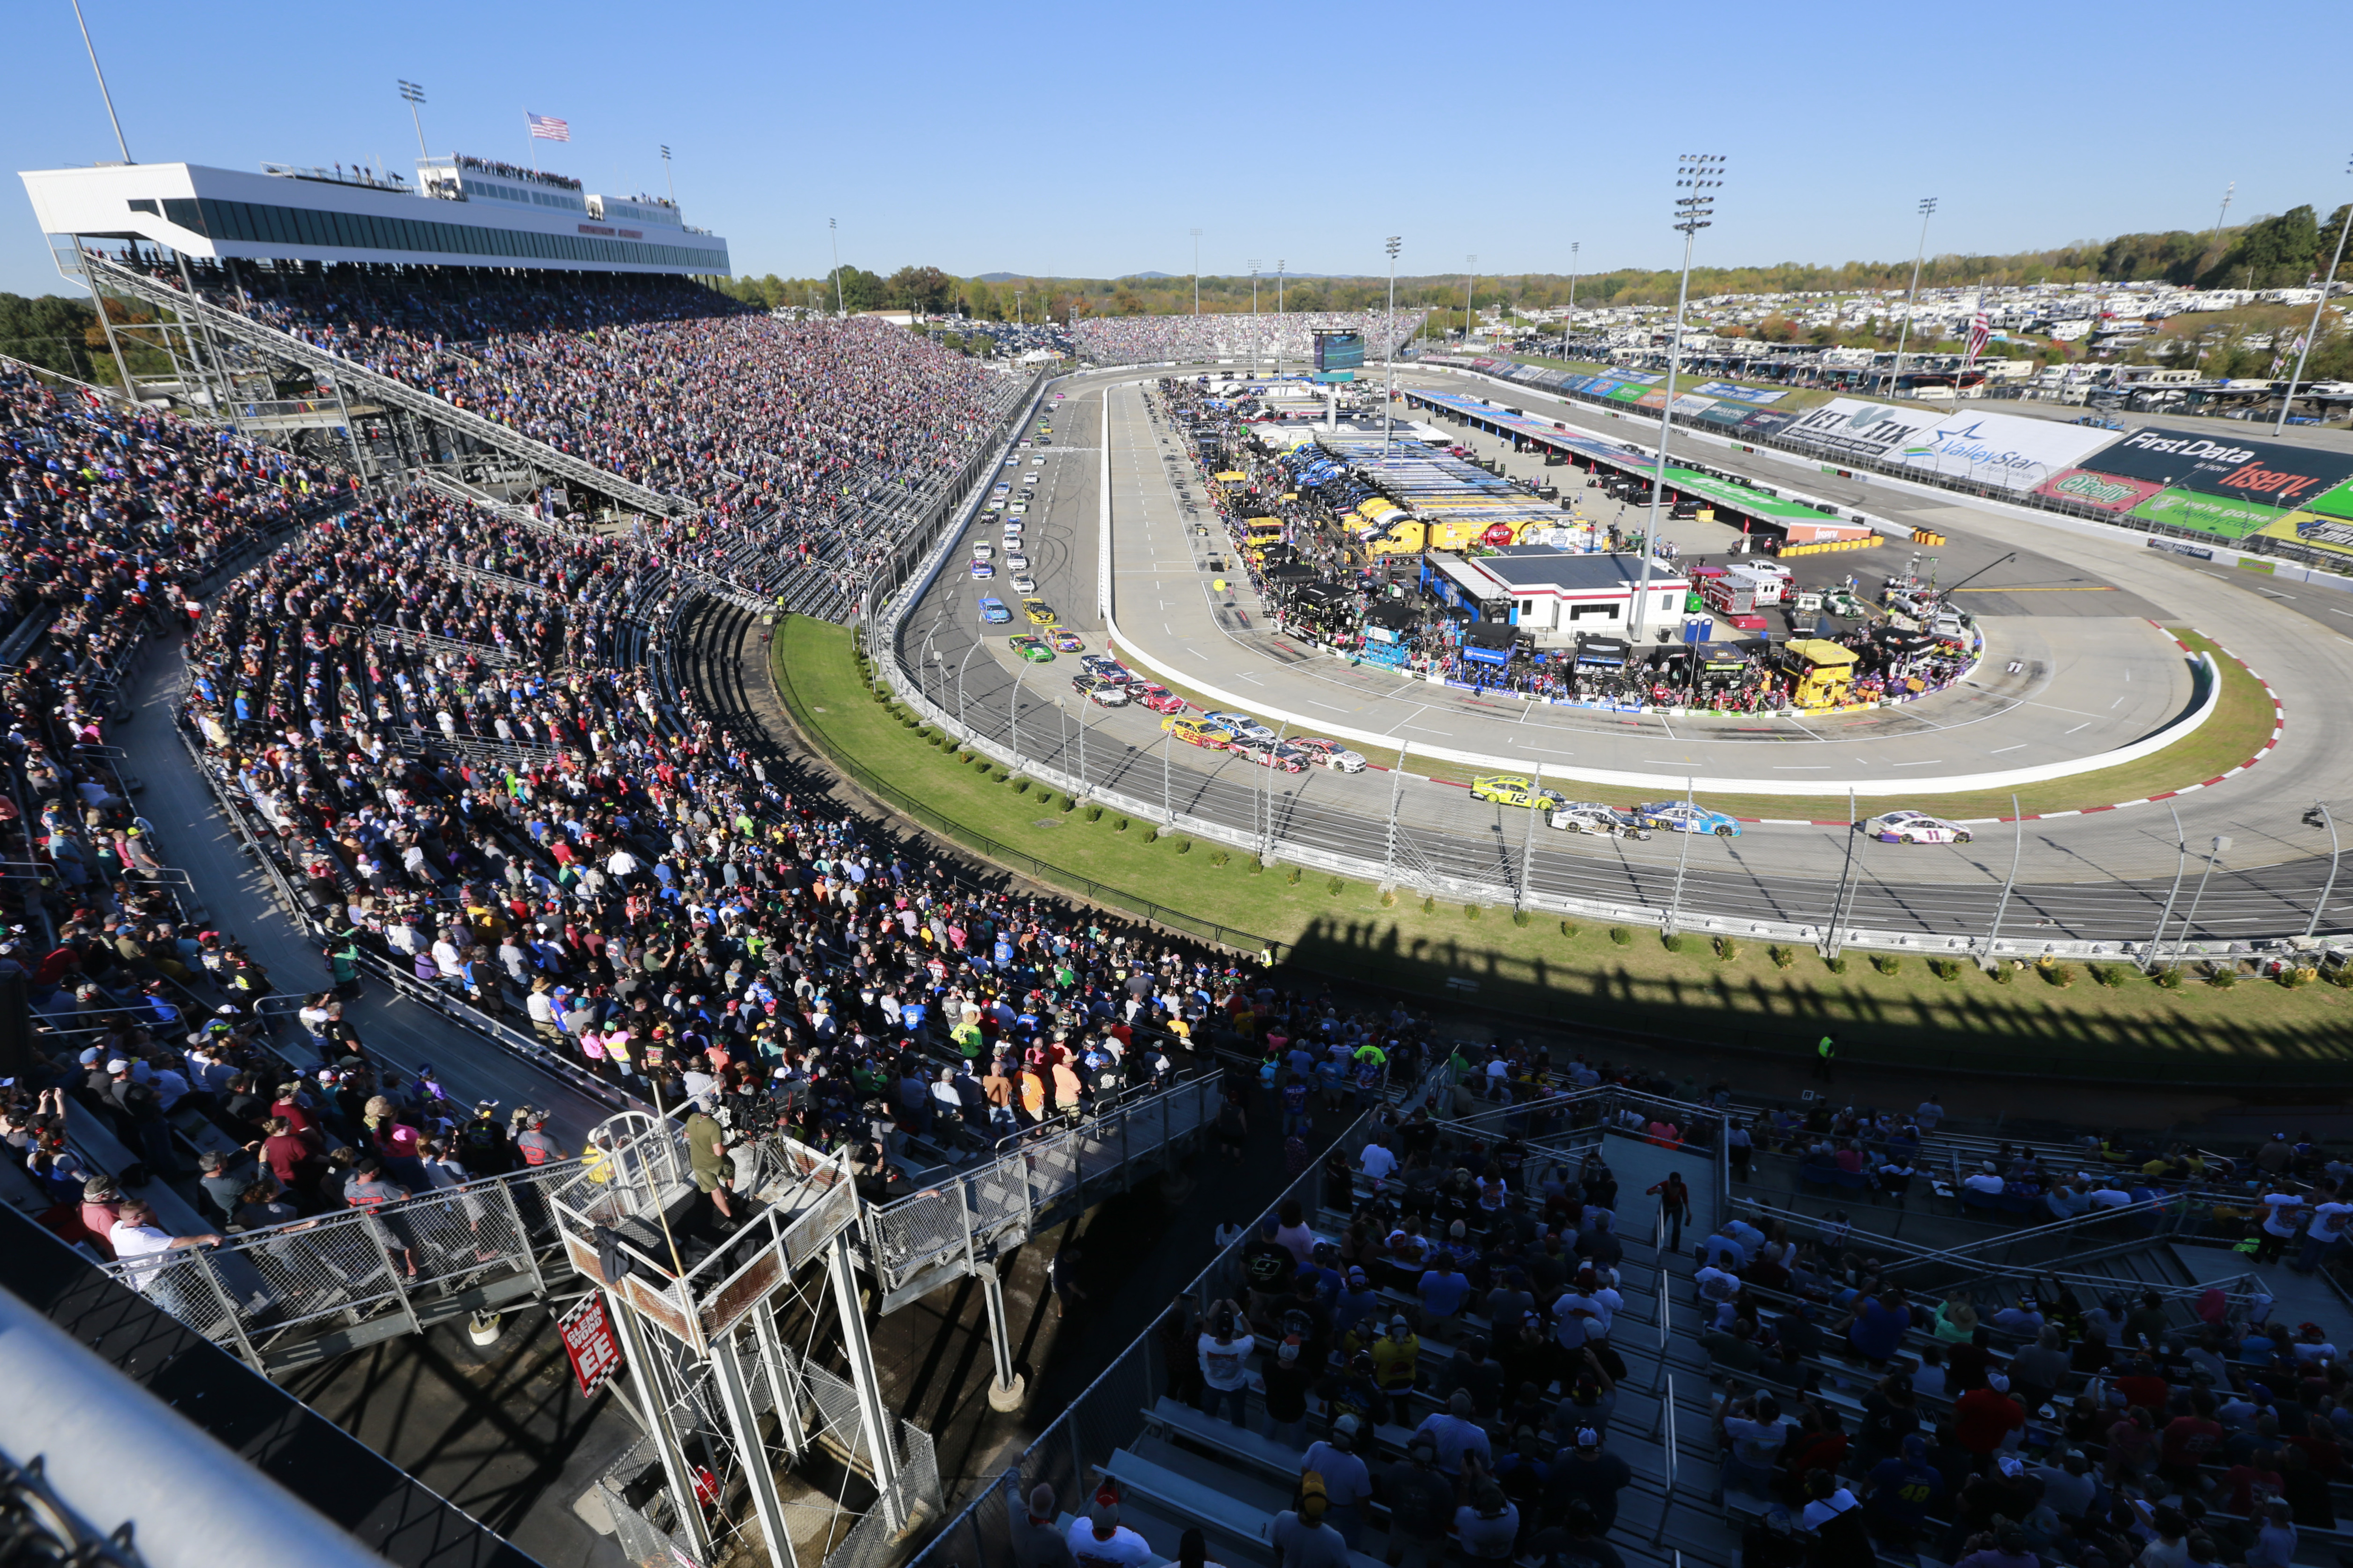 No attendance restrictions for upcoming NASCAR playoff races at Martinsville Speedway